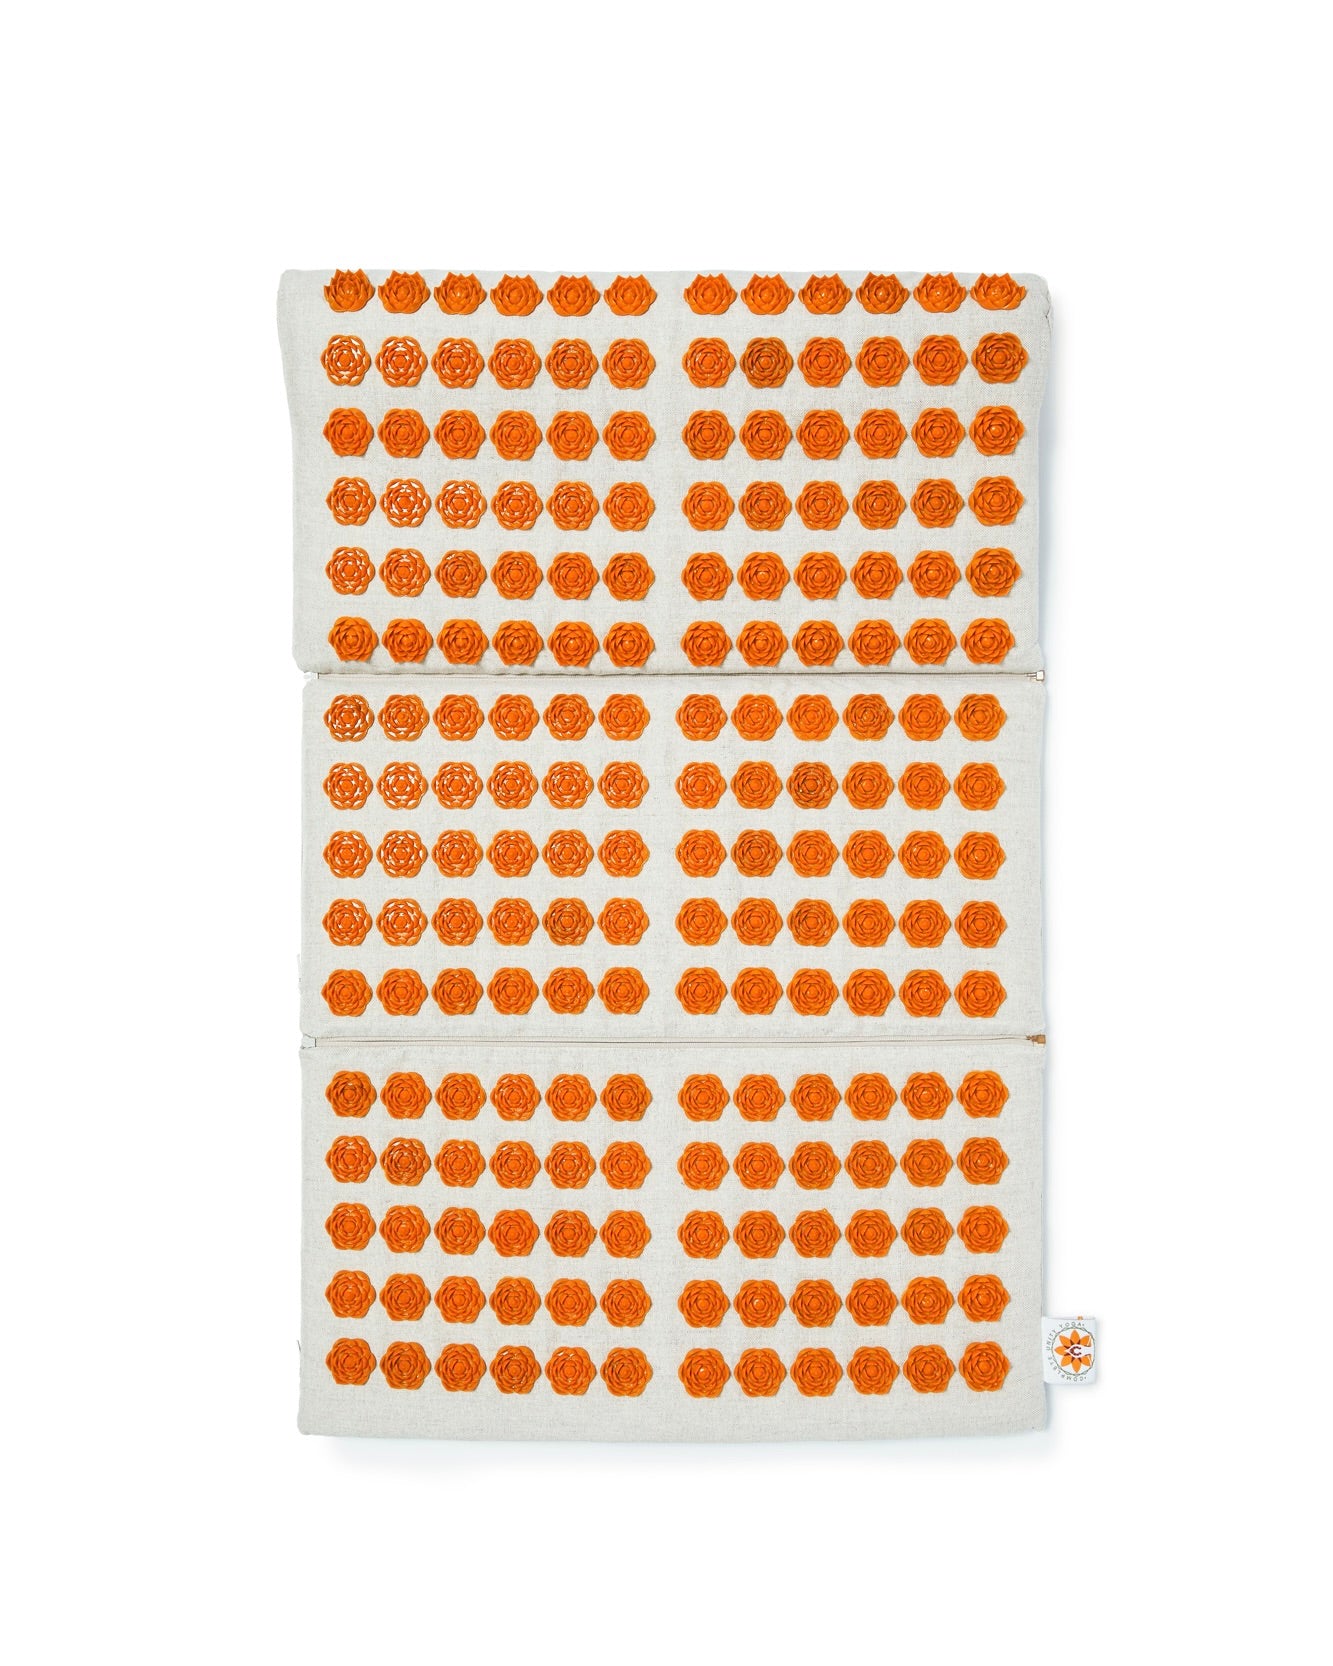 RelaxFast Acupressure Mat - Arial View 2 - Complete Unity Yoga